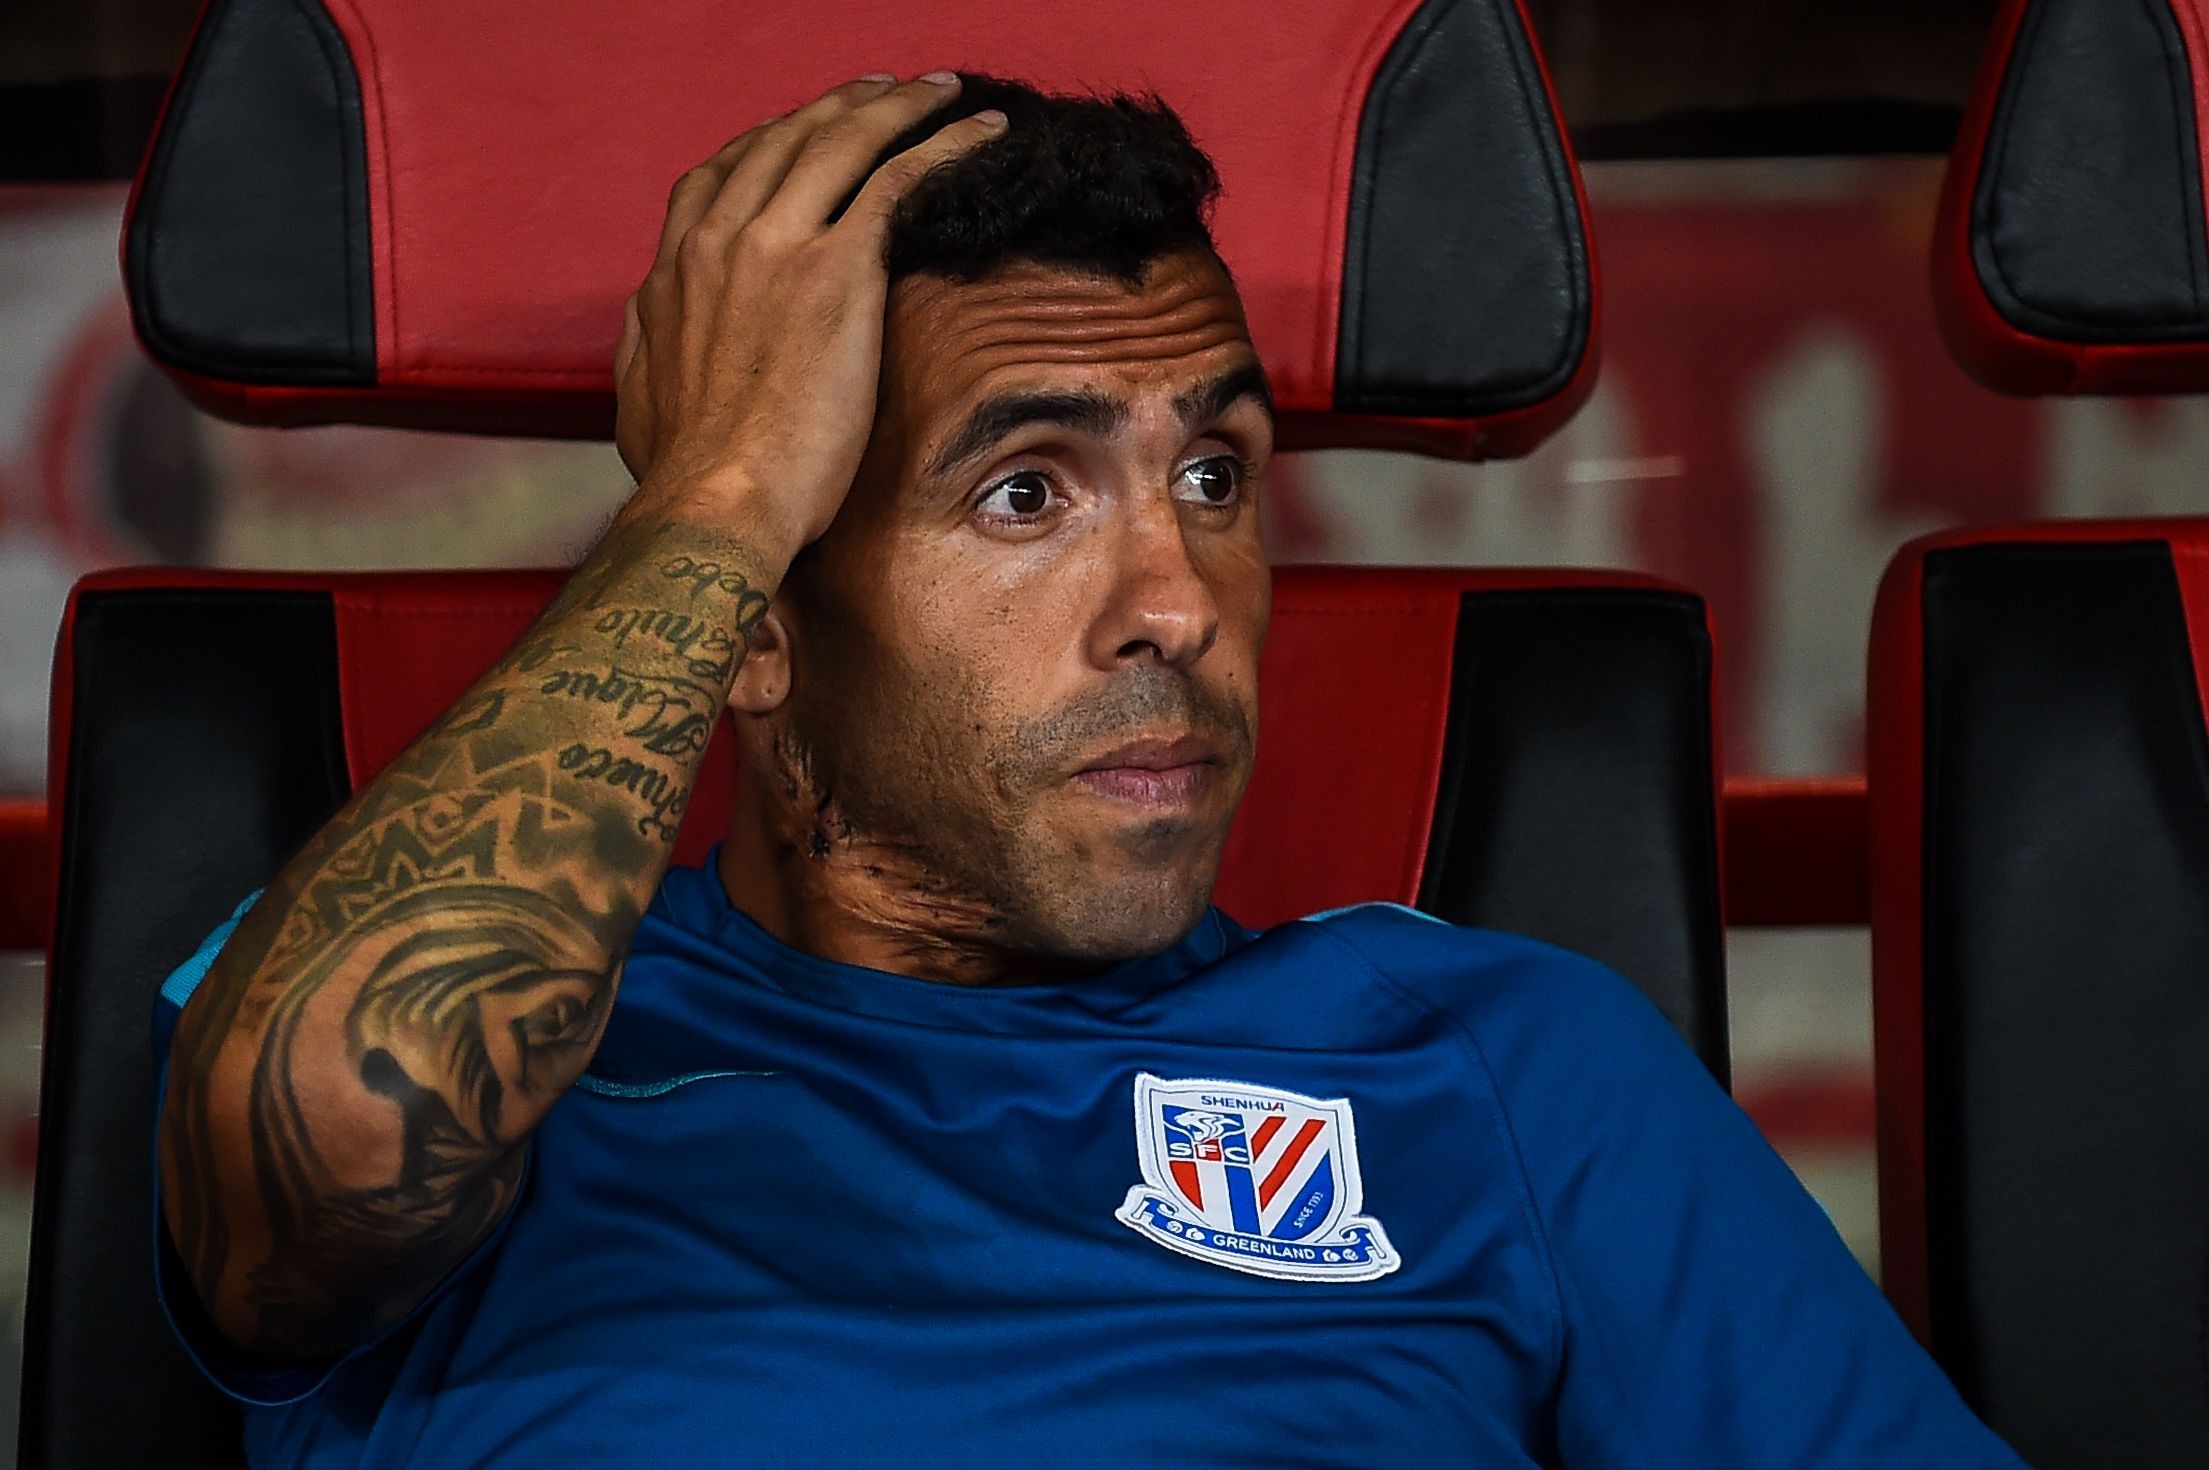 Shanghai Shenhua’s Carlos Tevez has been a flop for sure, but this week’s stories are wildly unfair. Photo: AFP